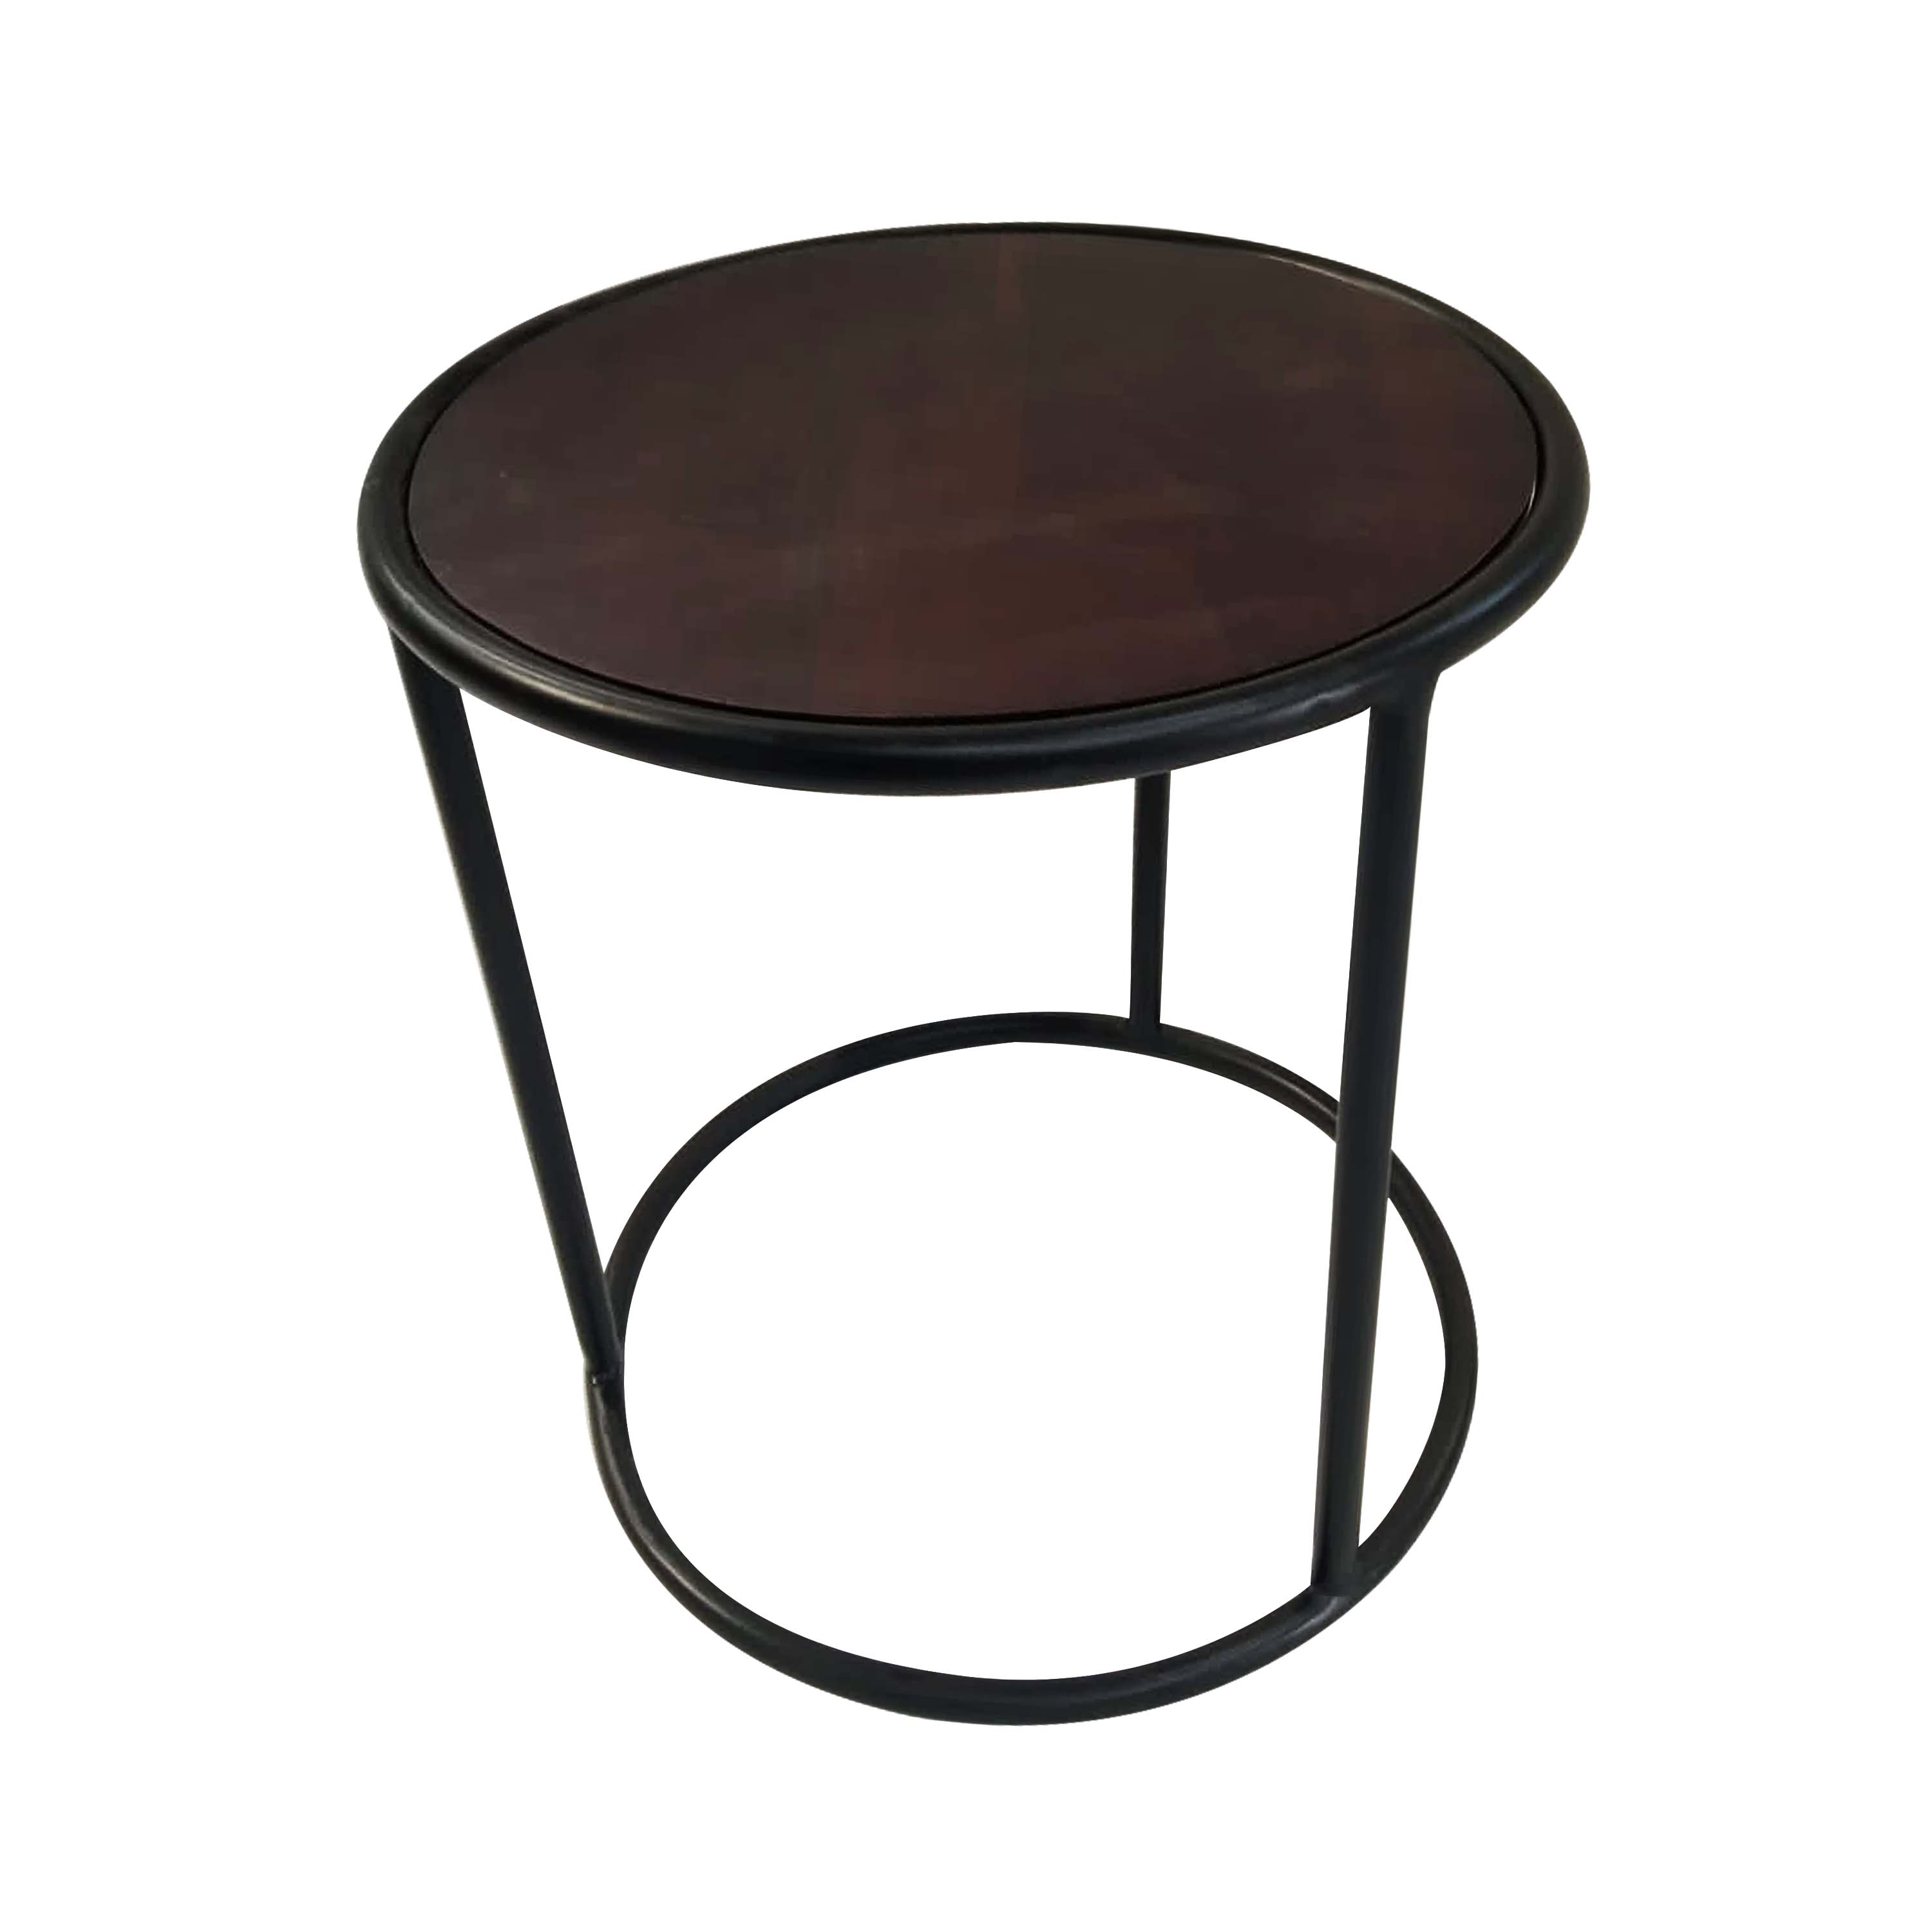 Classique round side table, modern home decor coffee table end table with metal frame for living room